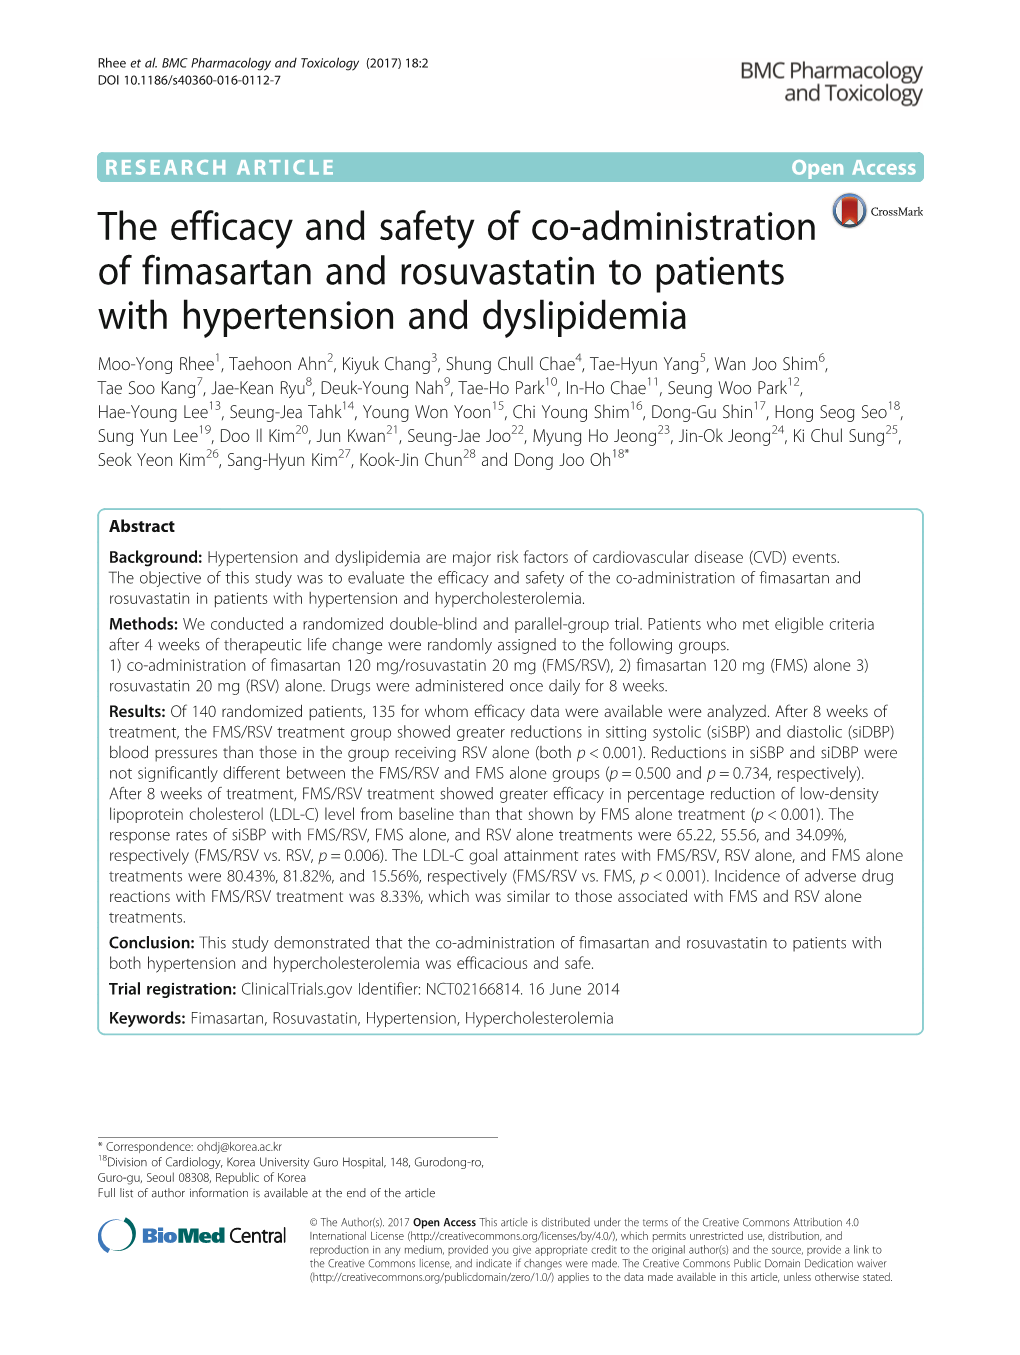 The Efficacy and Safety of Co-Administration of Fimasartan And